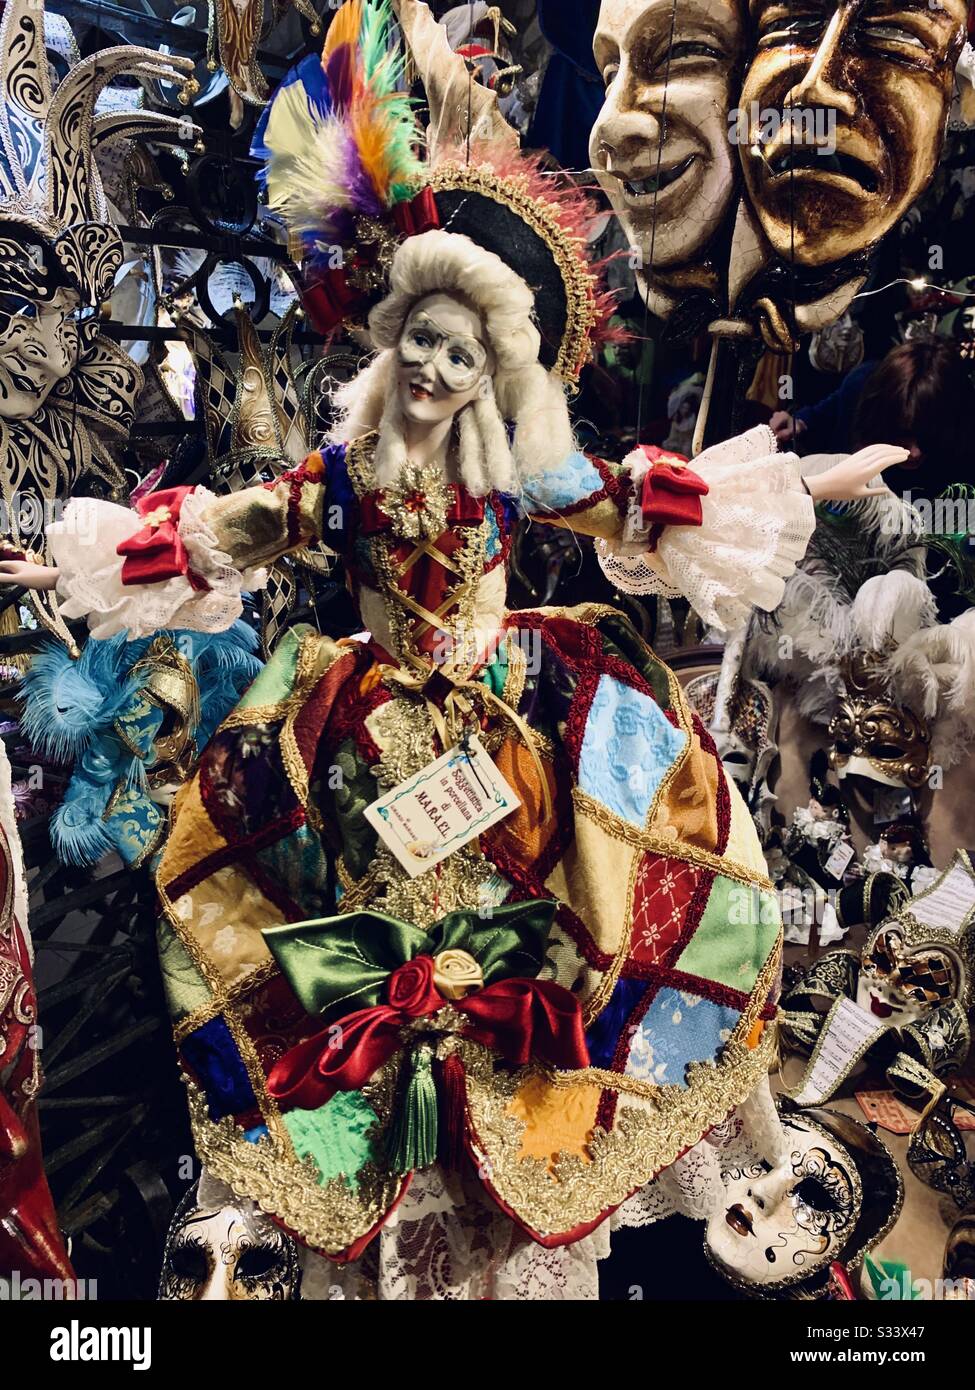 https://c8.alamy.com/comp/S33X47/doll-in-a-carnival-costume-in-venice-italy-S33X47.jpg